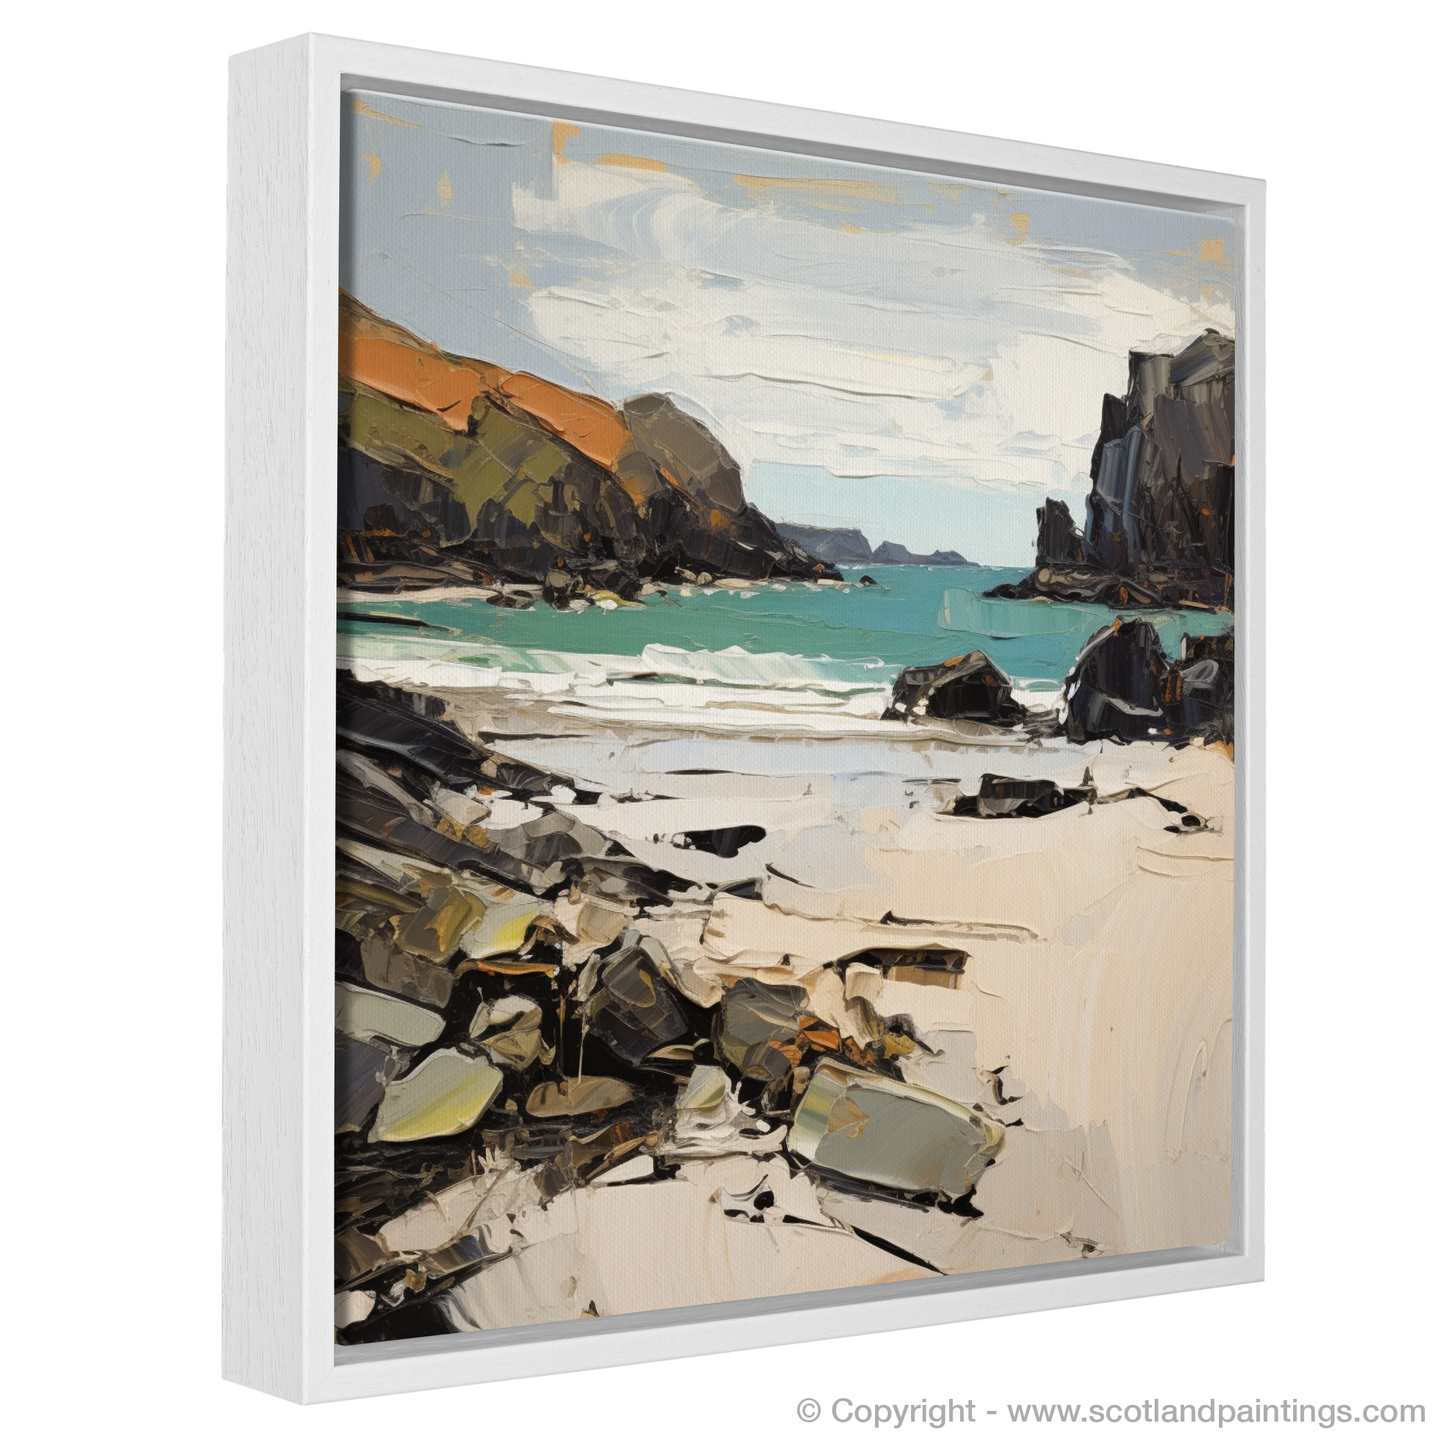 Painting and Art Print of Achmelvich Bay, Sutherland in summer entitled "Achmelvich Bay Summer Expression".